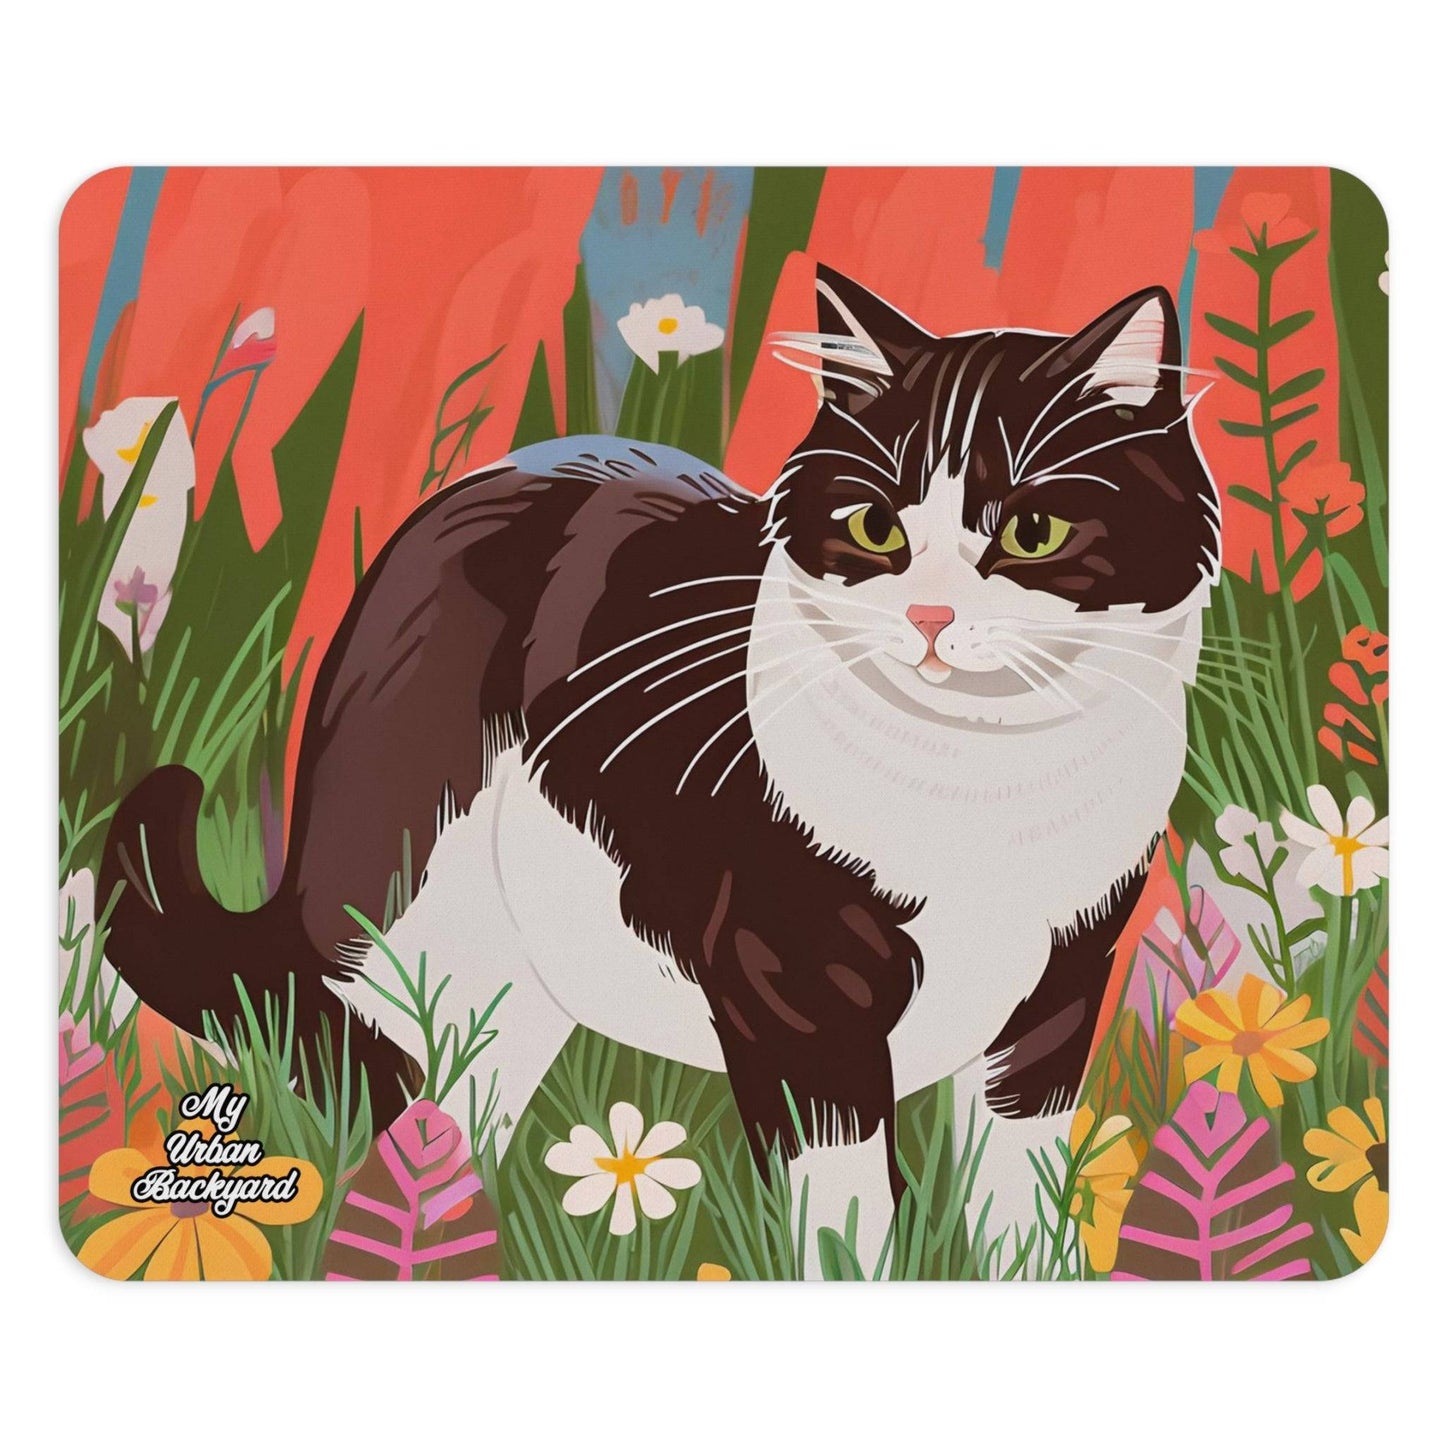 Computer Mouse Pad, Non-slip rubber bottom, Cat w Wildflowers